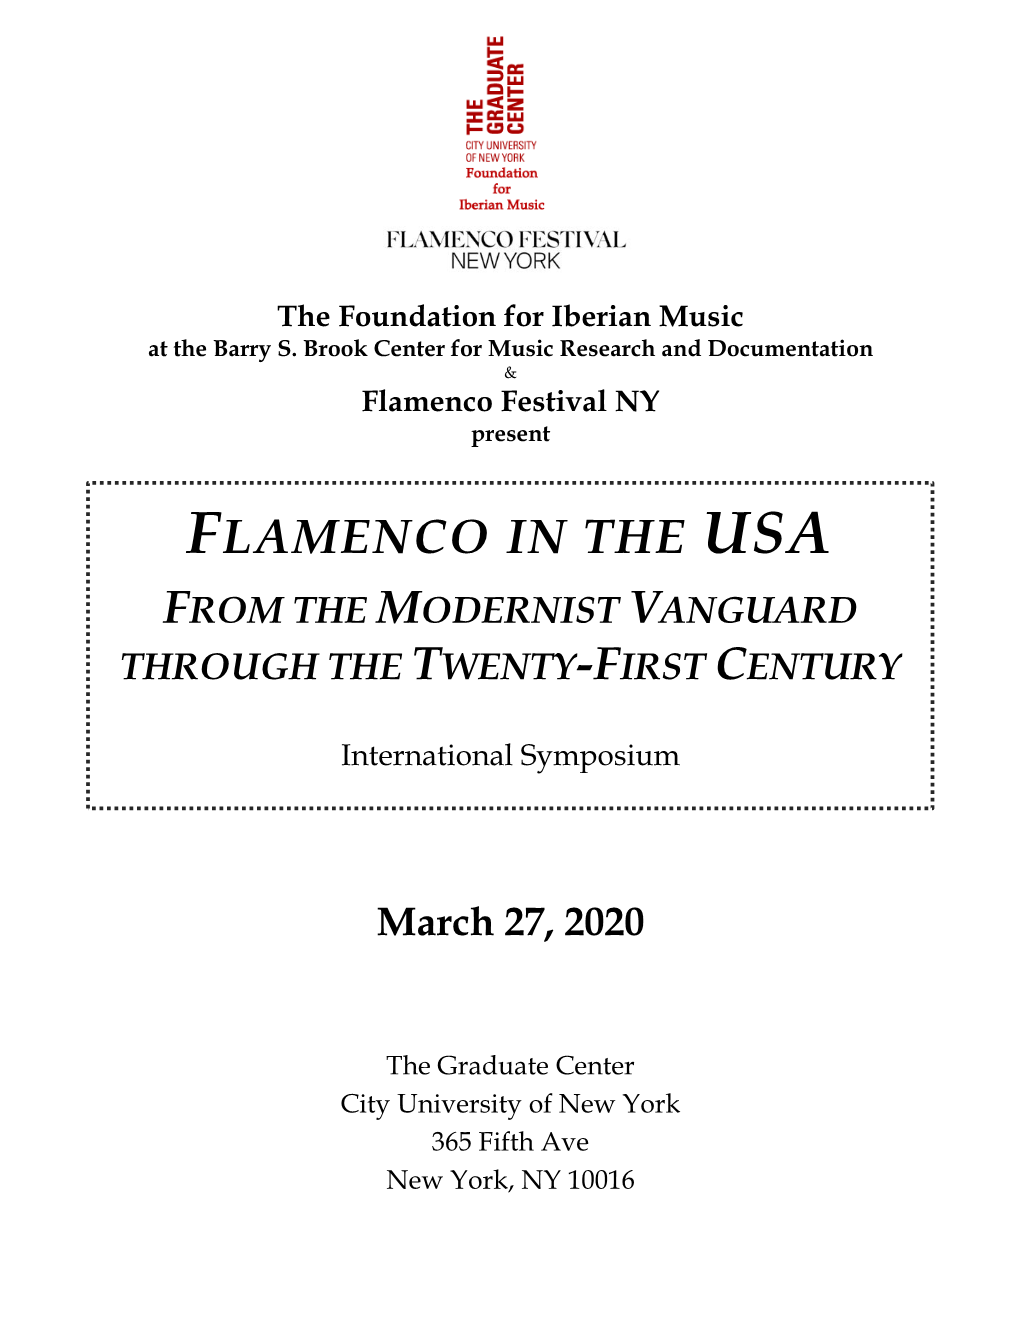 Flamenco in the Usa from the Modernist Vanguard Through the Twenty-First Century